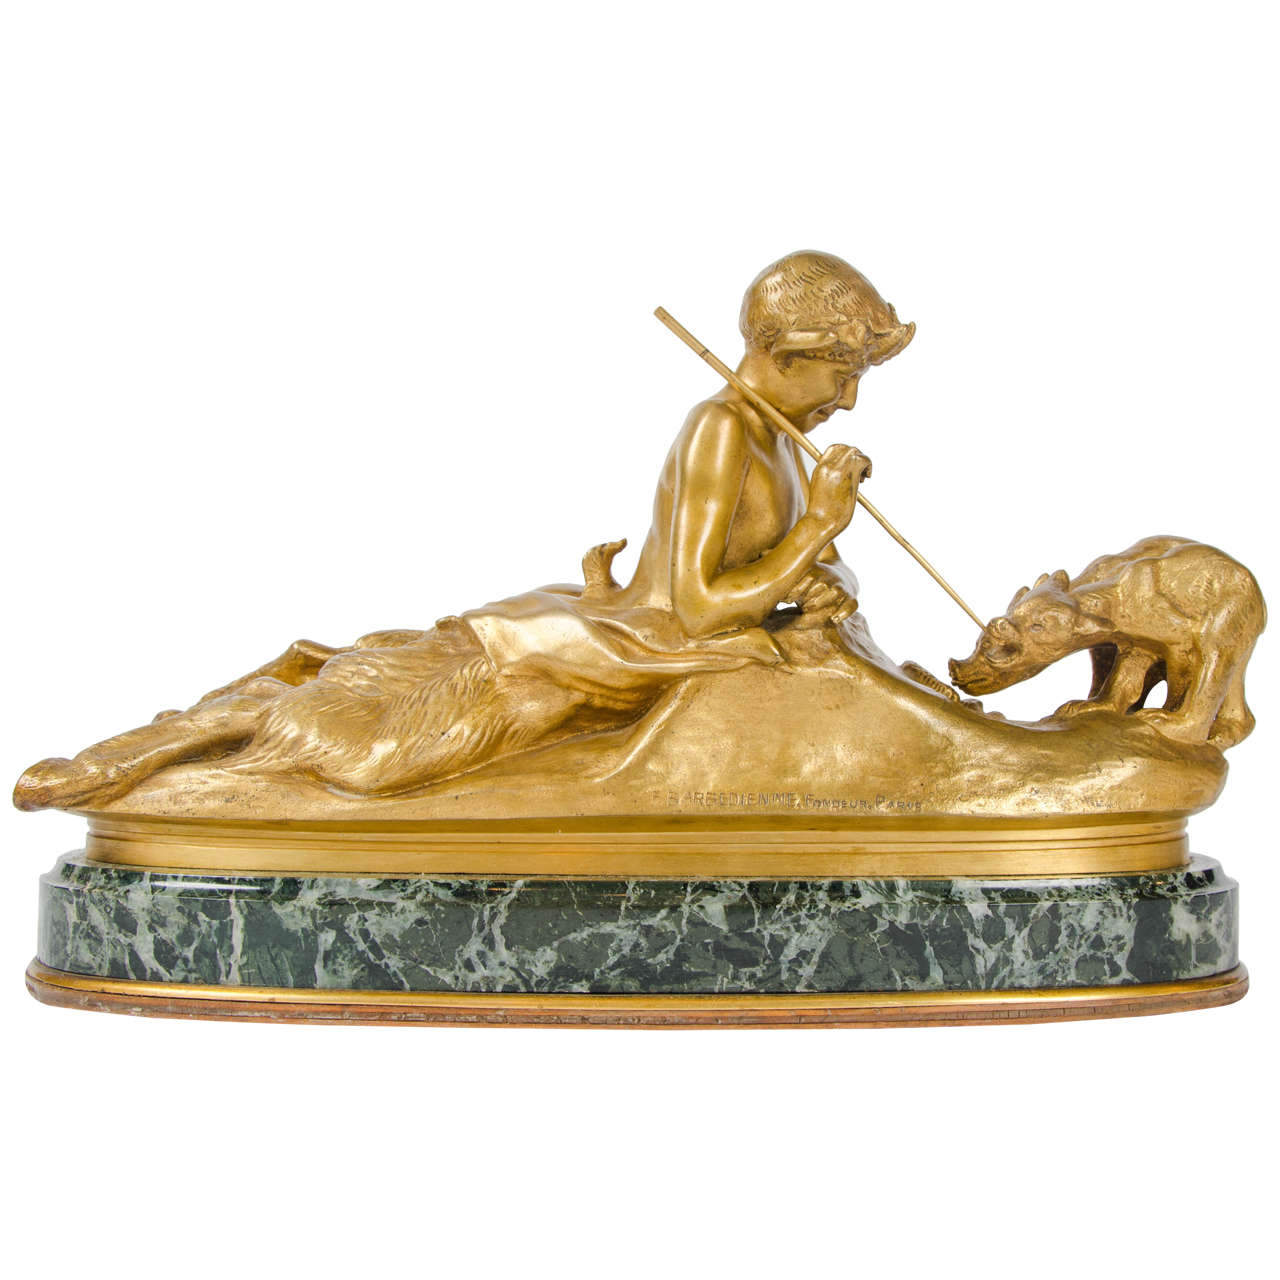 19th century Sculpture, "Pan with Bearcubs" by E. Fremiet